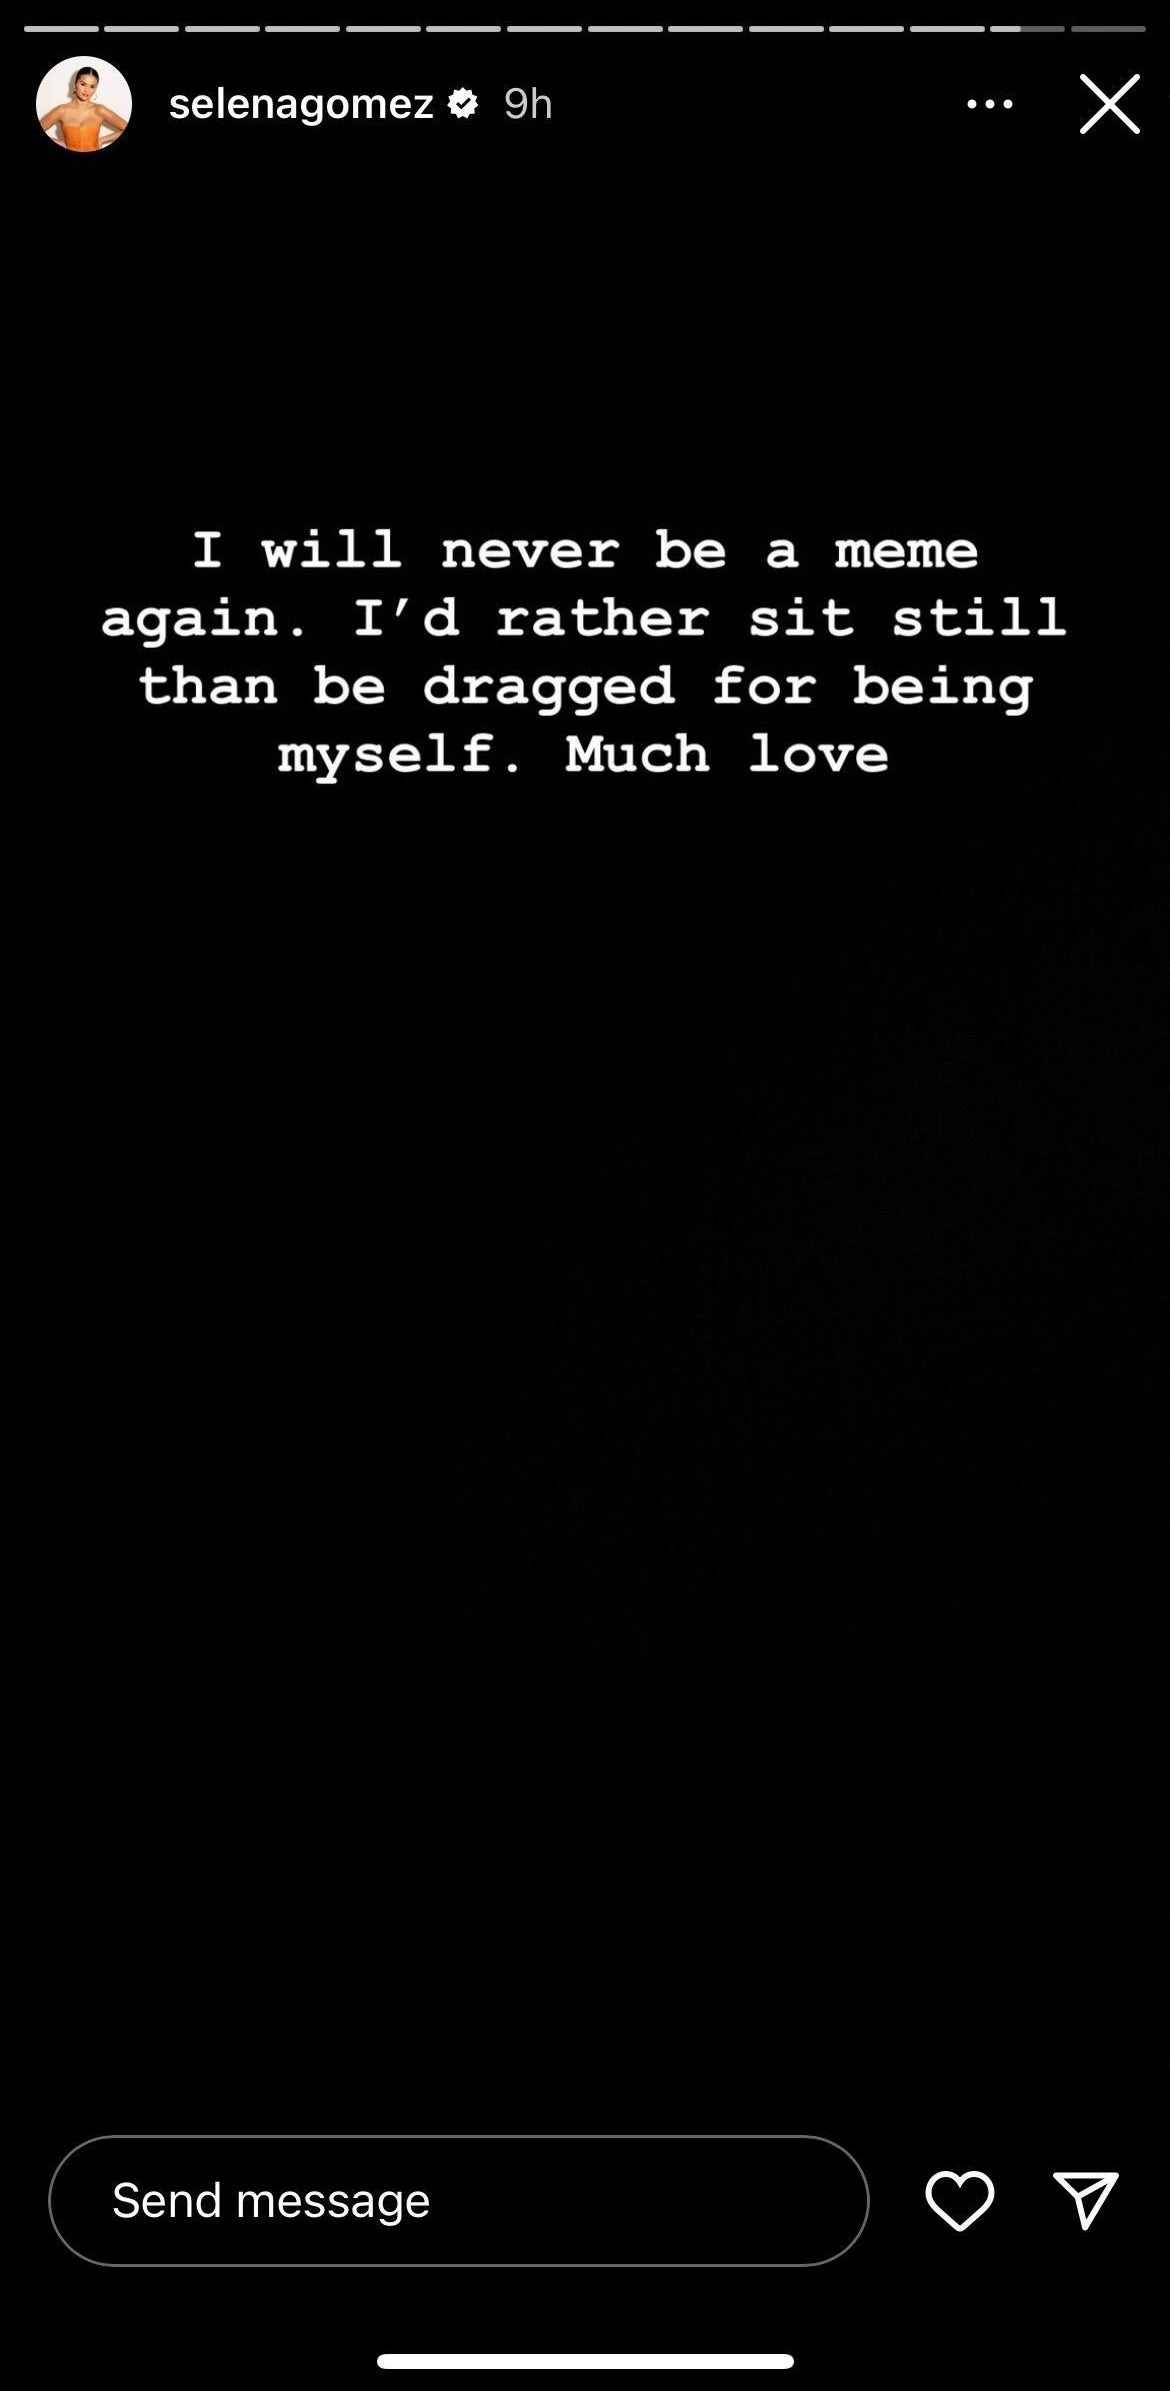 Her IG story message: &quot;I will never be a meme again; I&#x27;d rather sit still than be dragged for being myself; much love&quot;